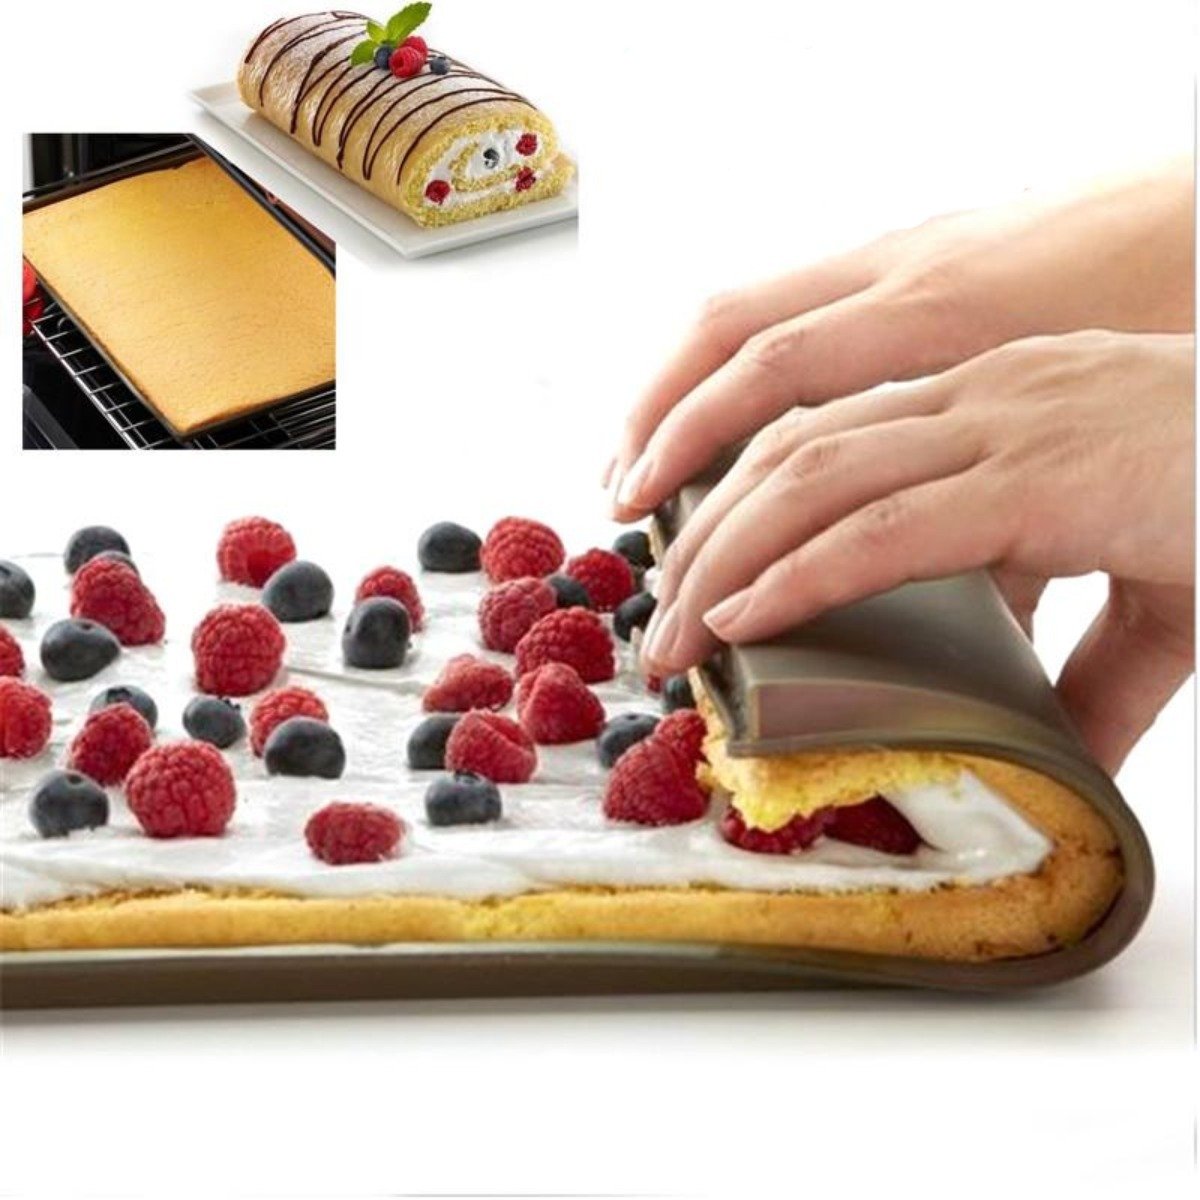 A collage showing the steps to make a fruit roll cake, including baking a flat cake on a Non-stick Silicone Oven Cake Roll Mat, spreading cream, and rolling it topped with berries.